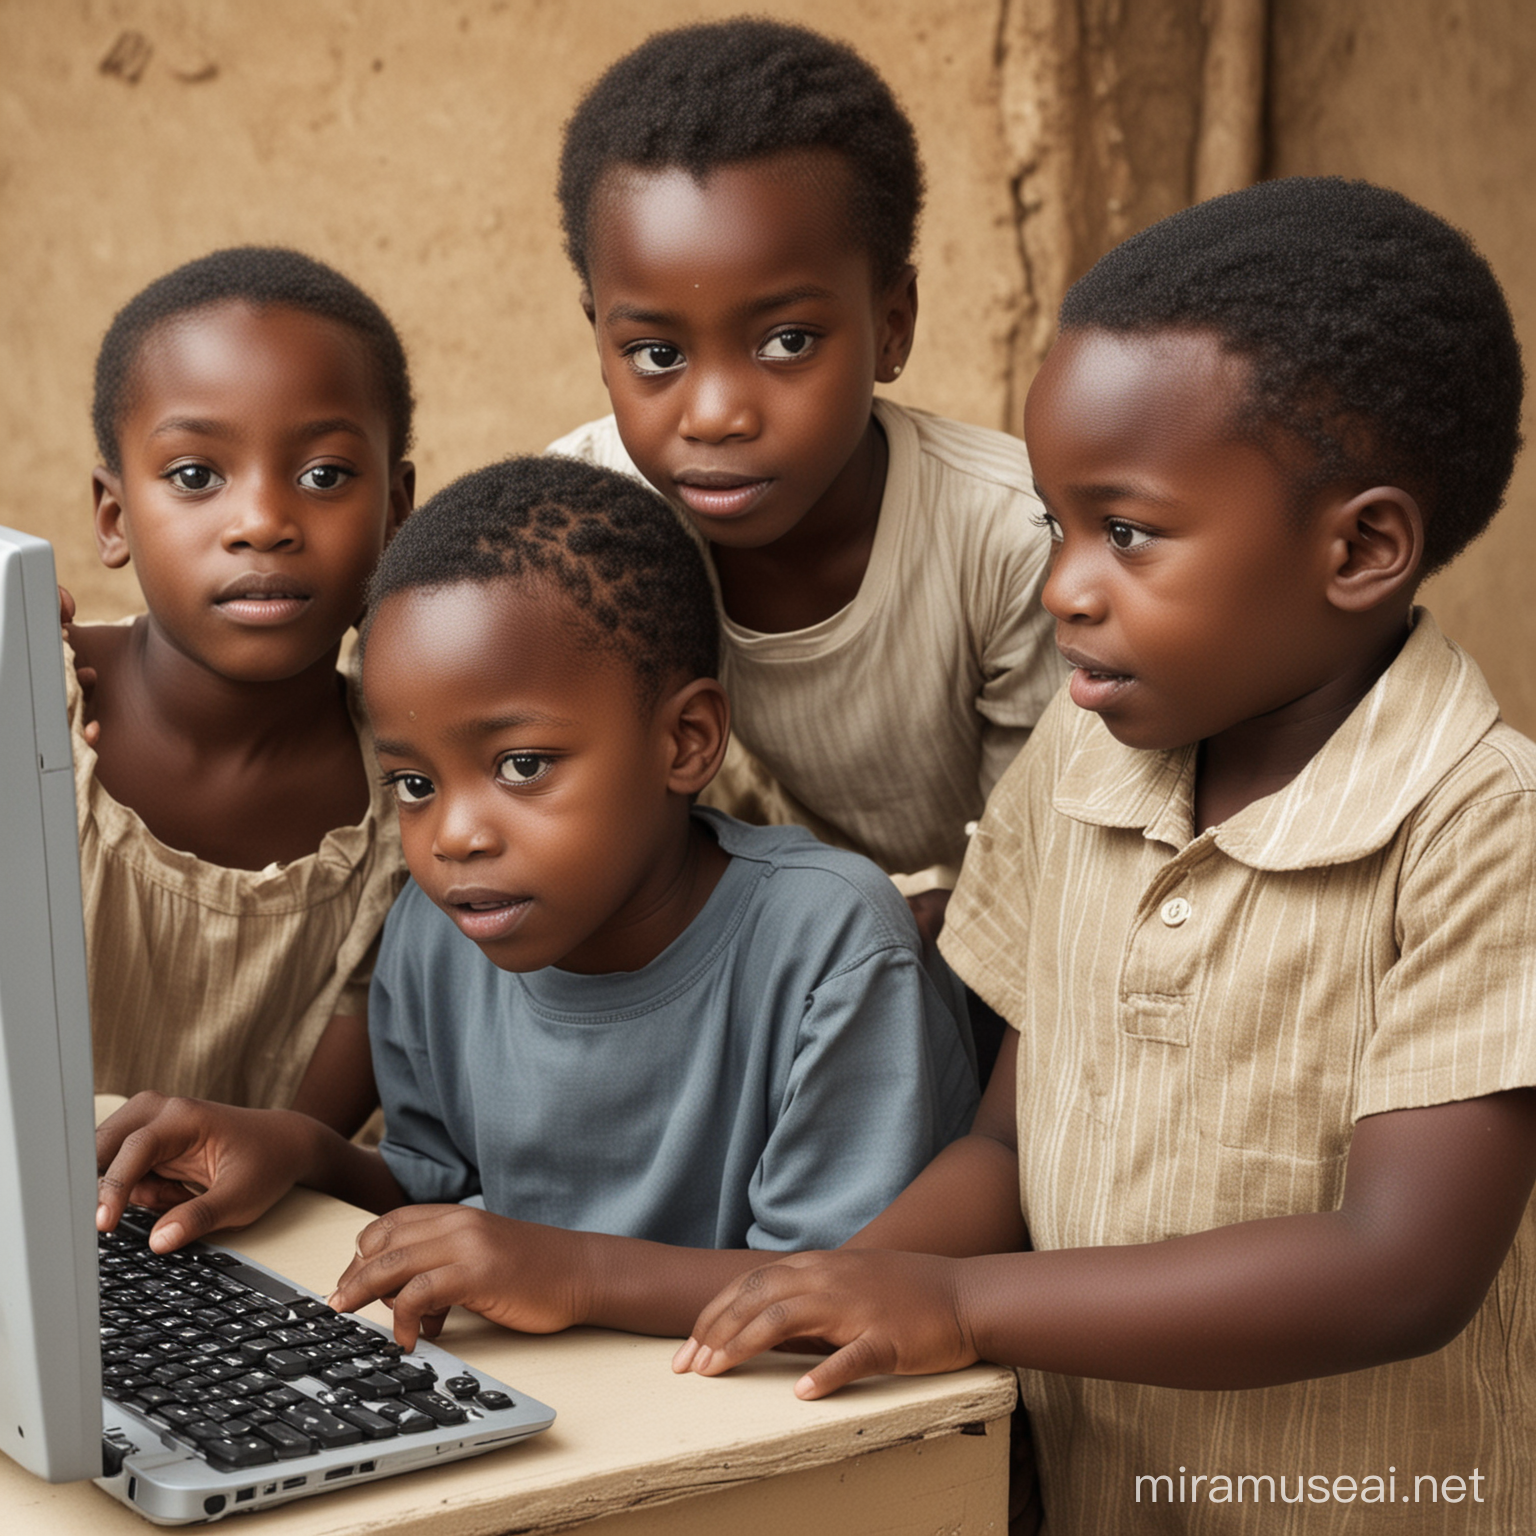 African Children Learning Together with a Computer